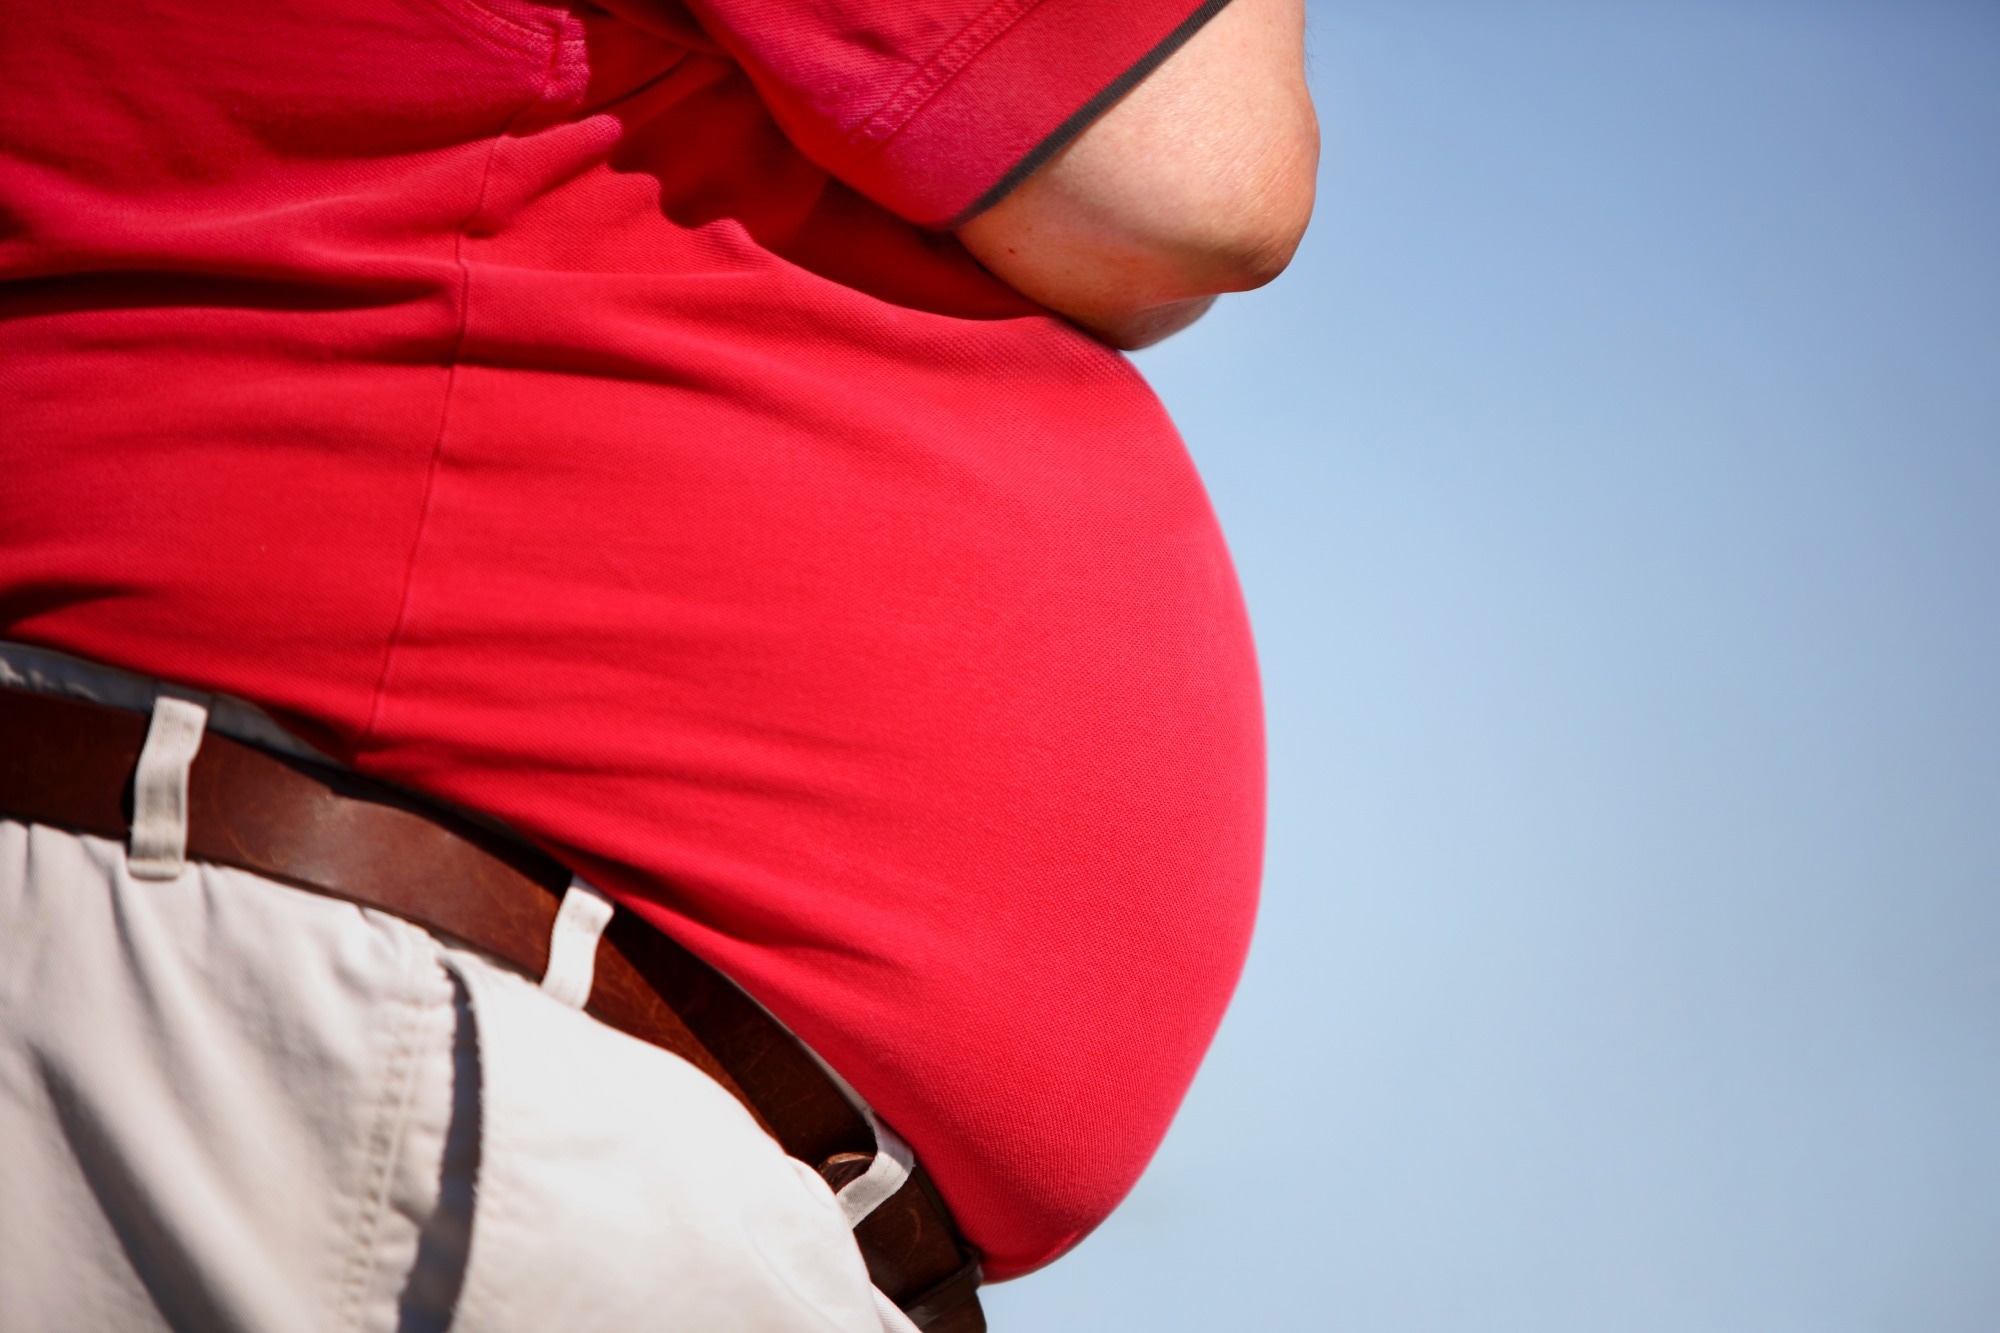 Study: What is the pipeline for future drugs for obesity?  Image credit: Suzanne Tucker / Shutterstock